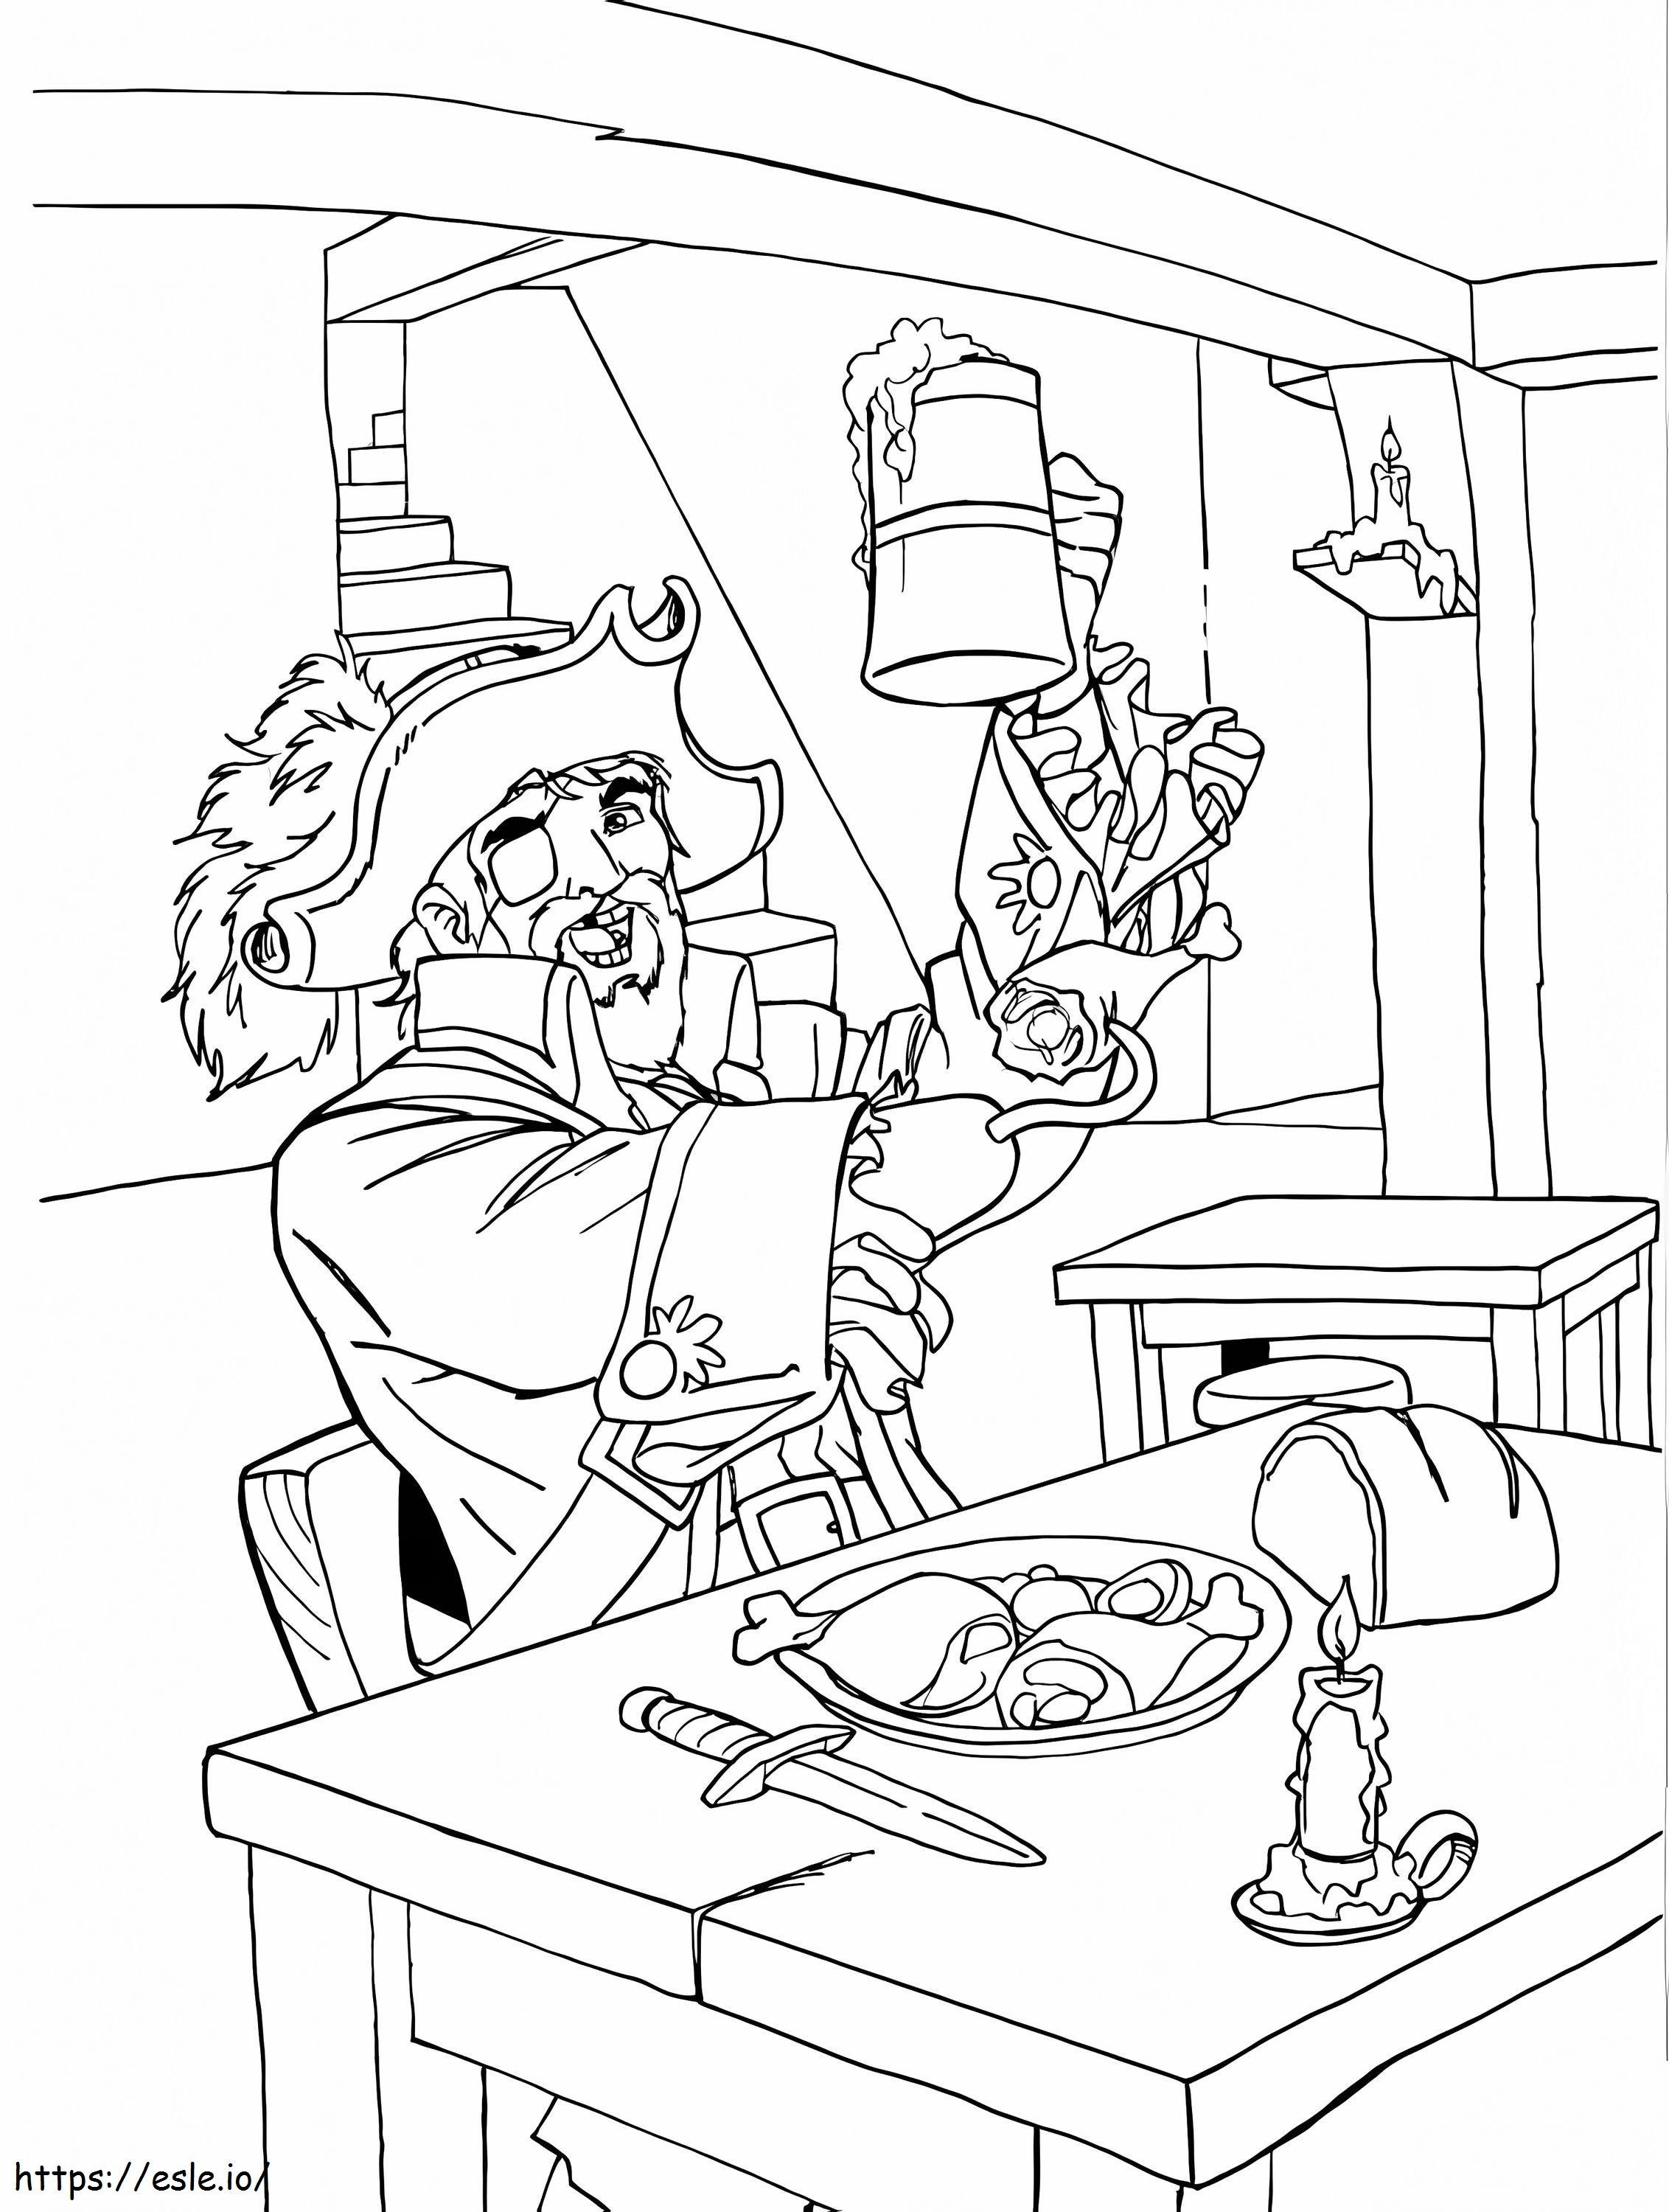 One-Eyed Pirate With A Hook coloring page